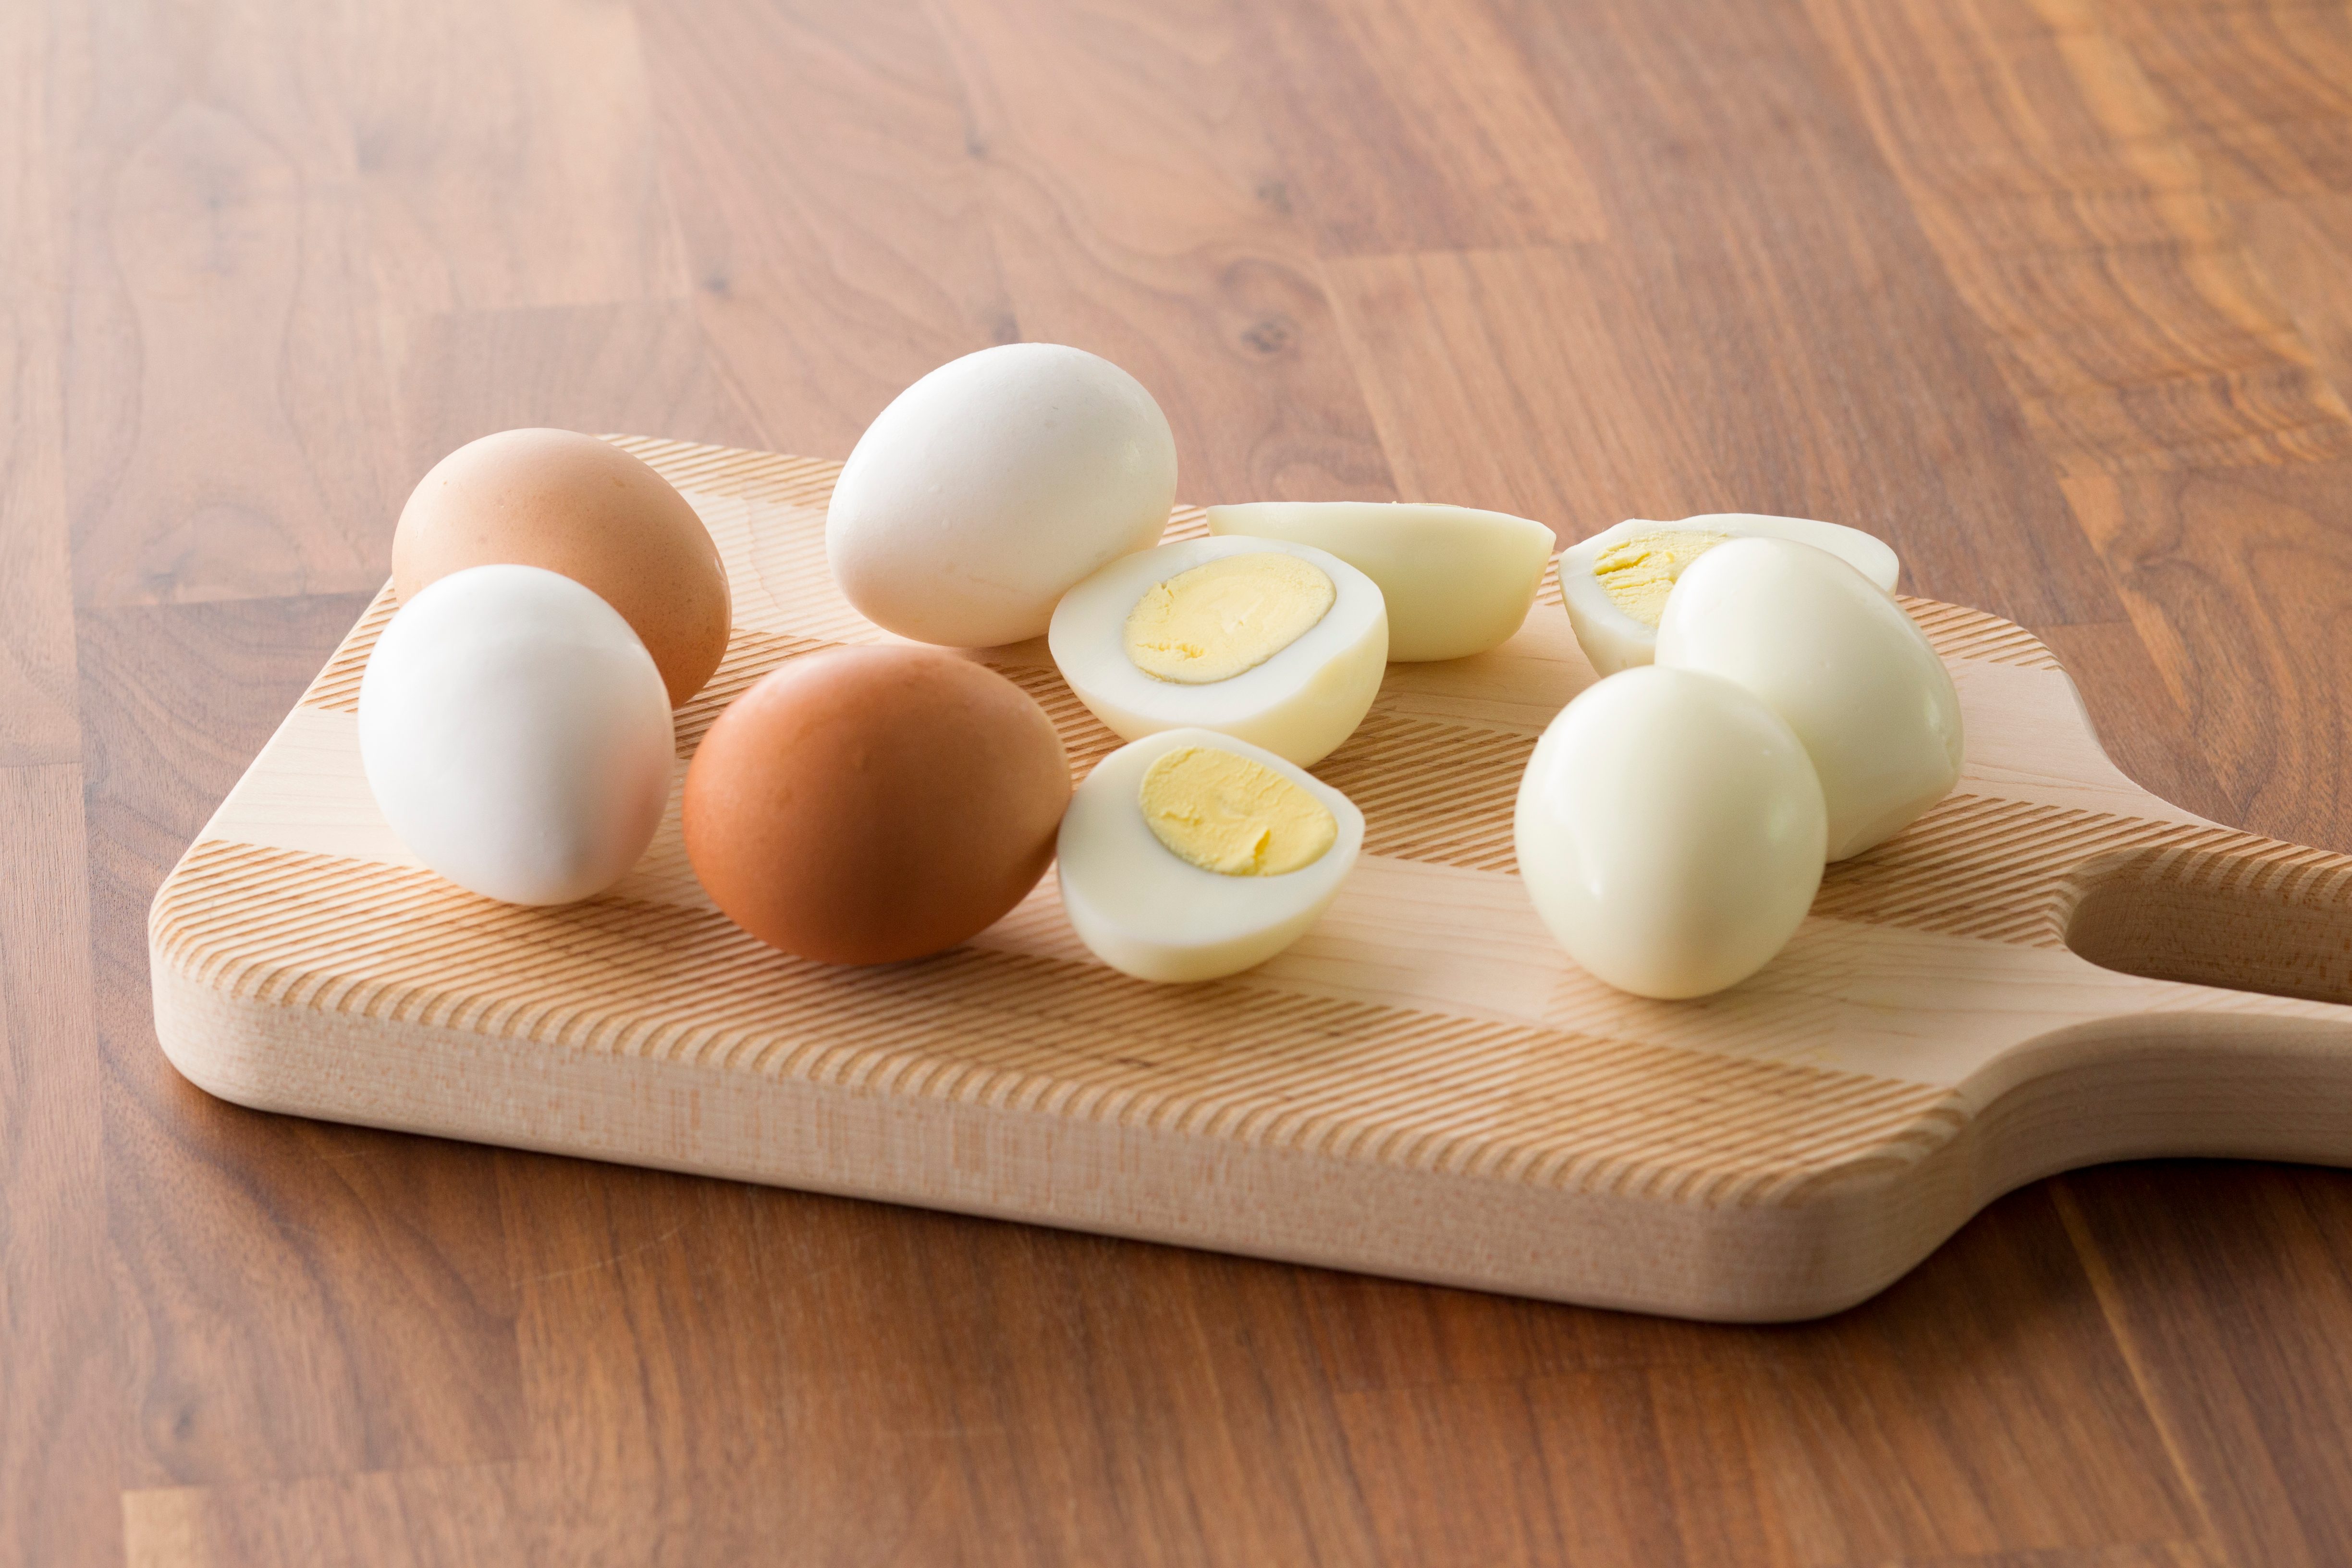 How to Peel a Hard-Boiled Egg